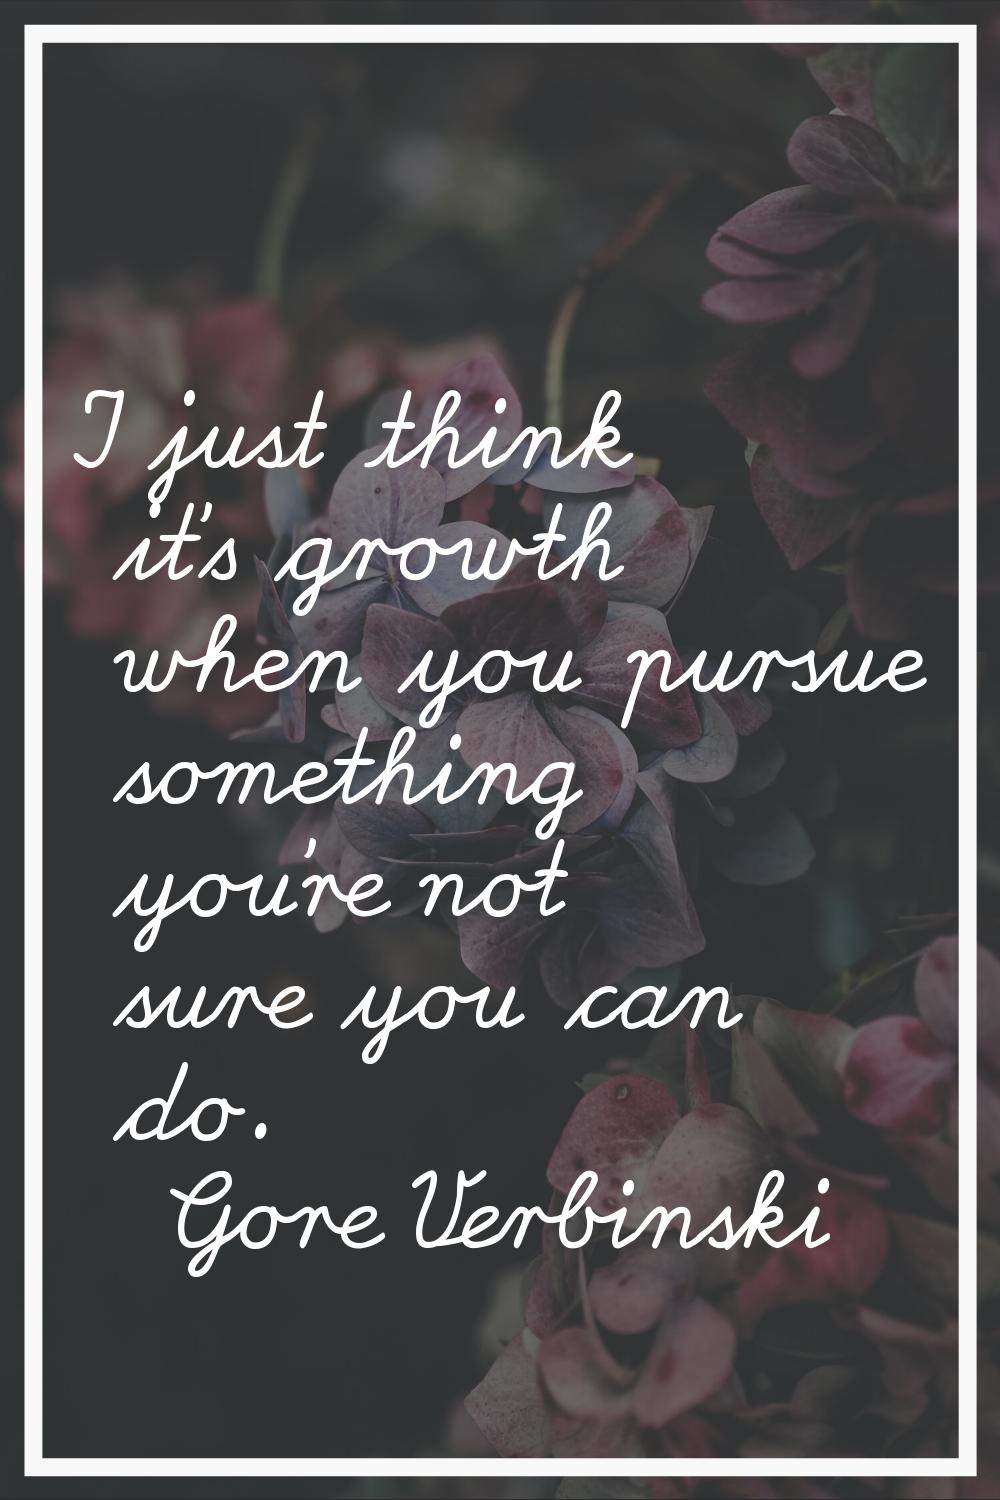 I just think it's growth when you pursue something you're not sure you can do.